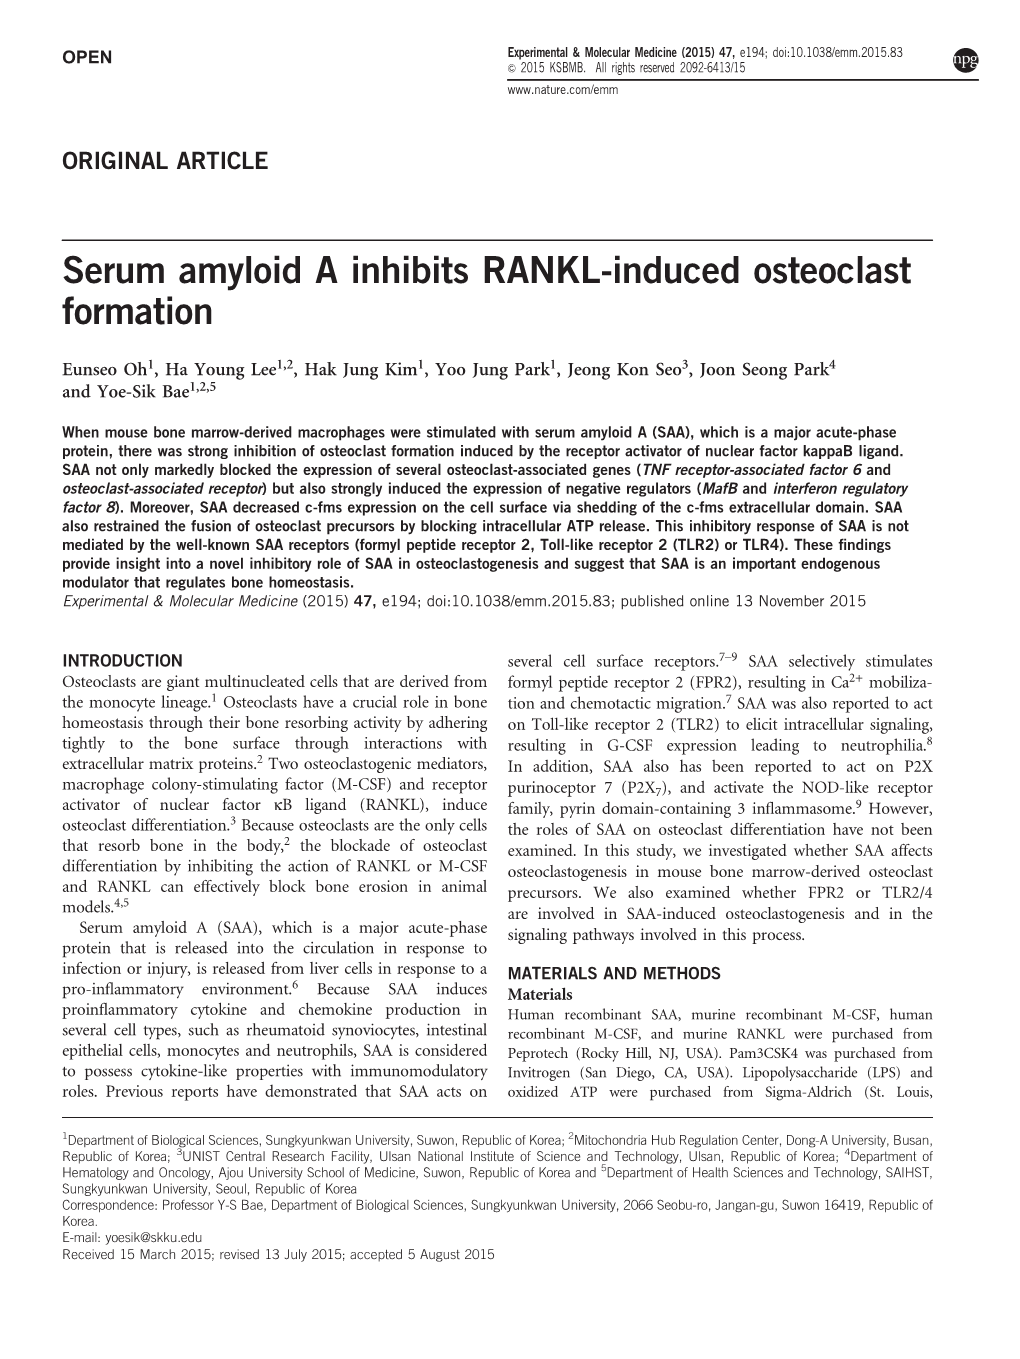 Serum Amyloid a Inhibits RANKL-Induced Osteoclast Formation